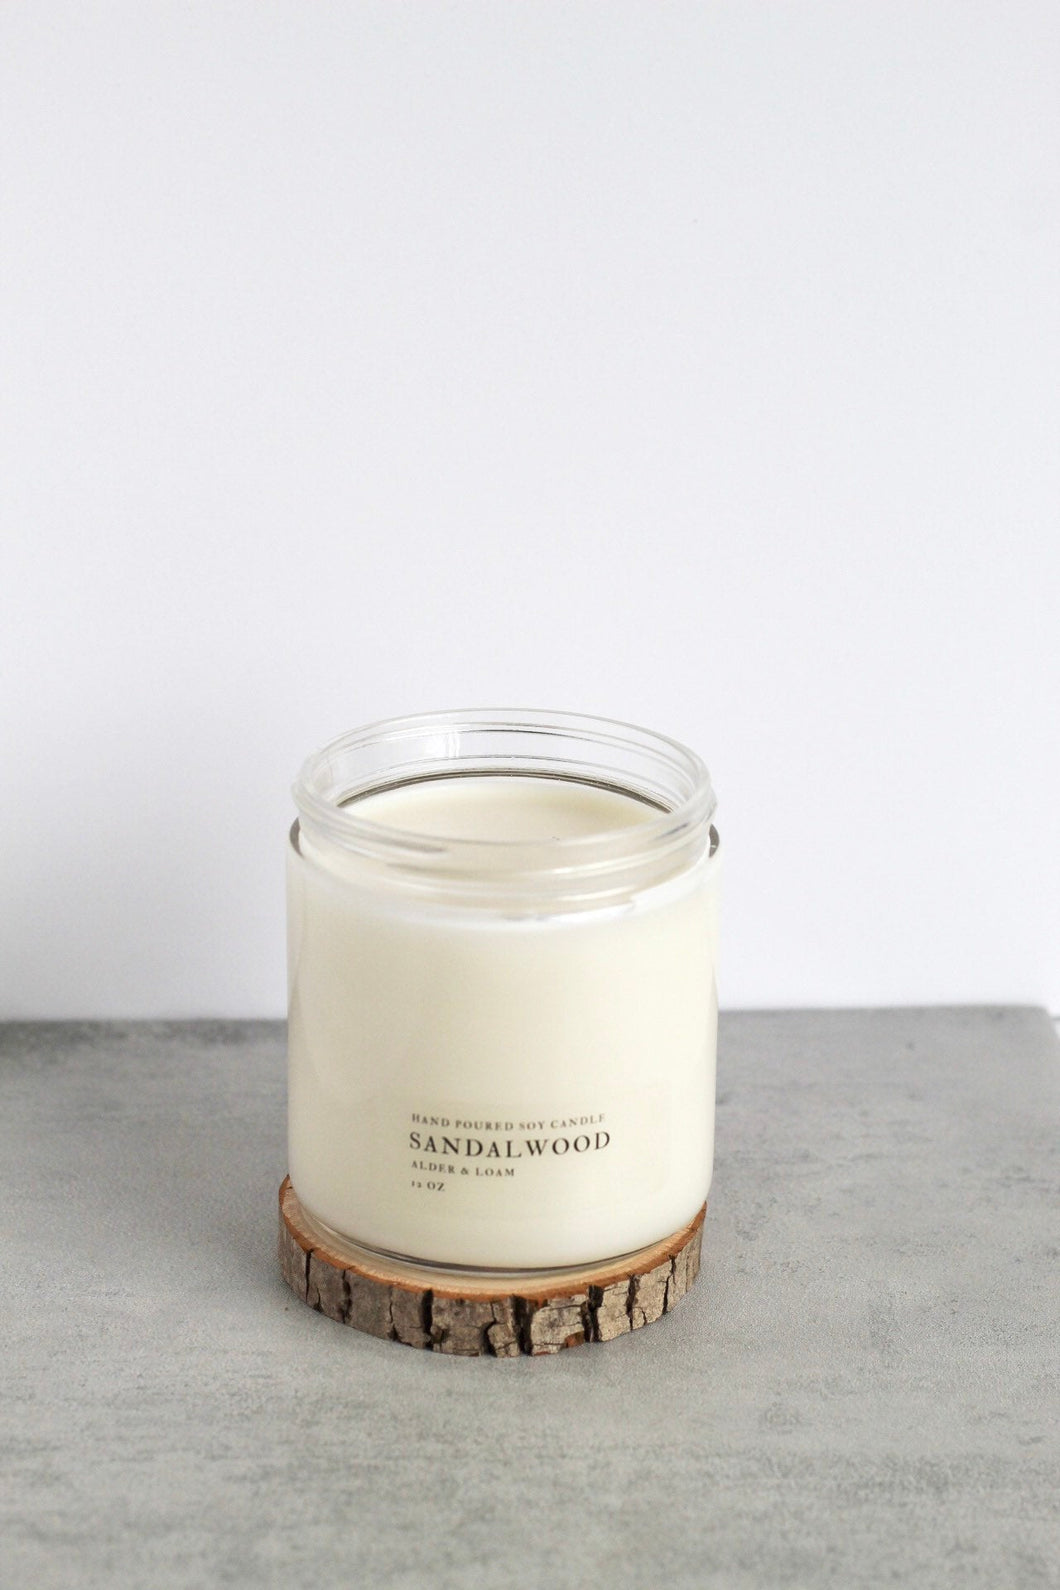 Sandalwood Double Wick Soy Candle, Hand Poured, Natural, Eco Friendly, Earthy Scent, 12 oz Jar